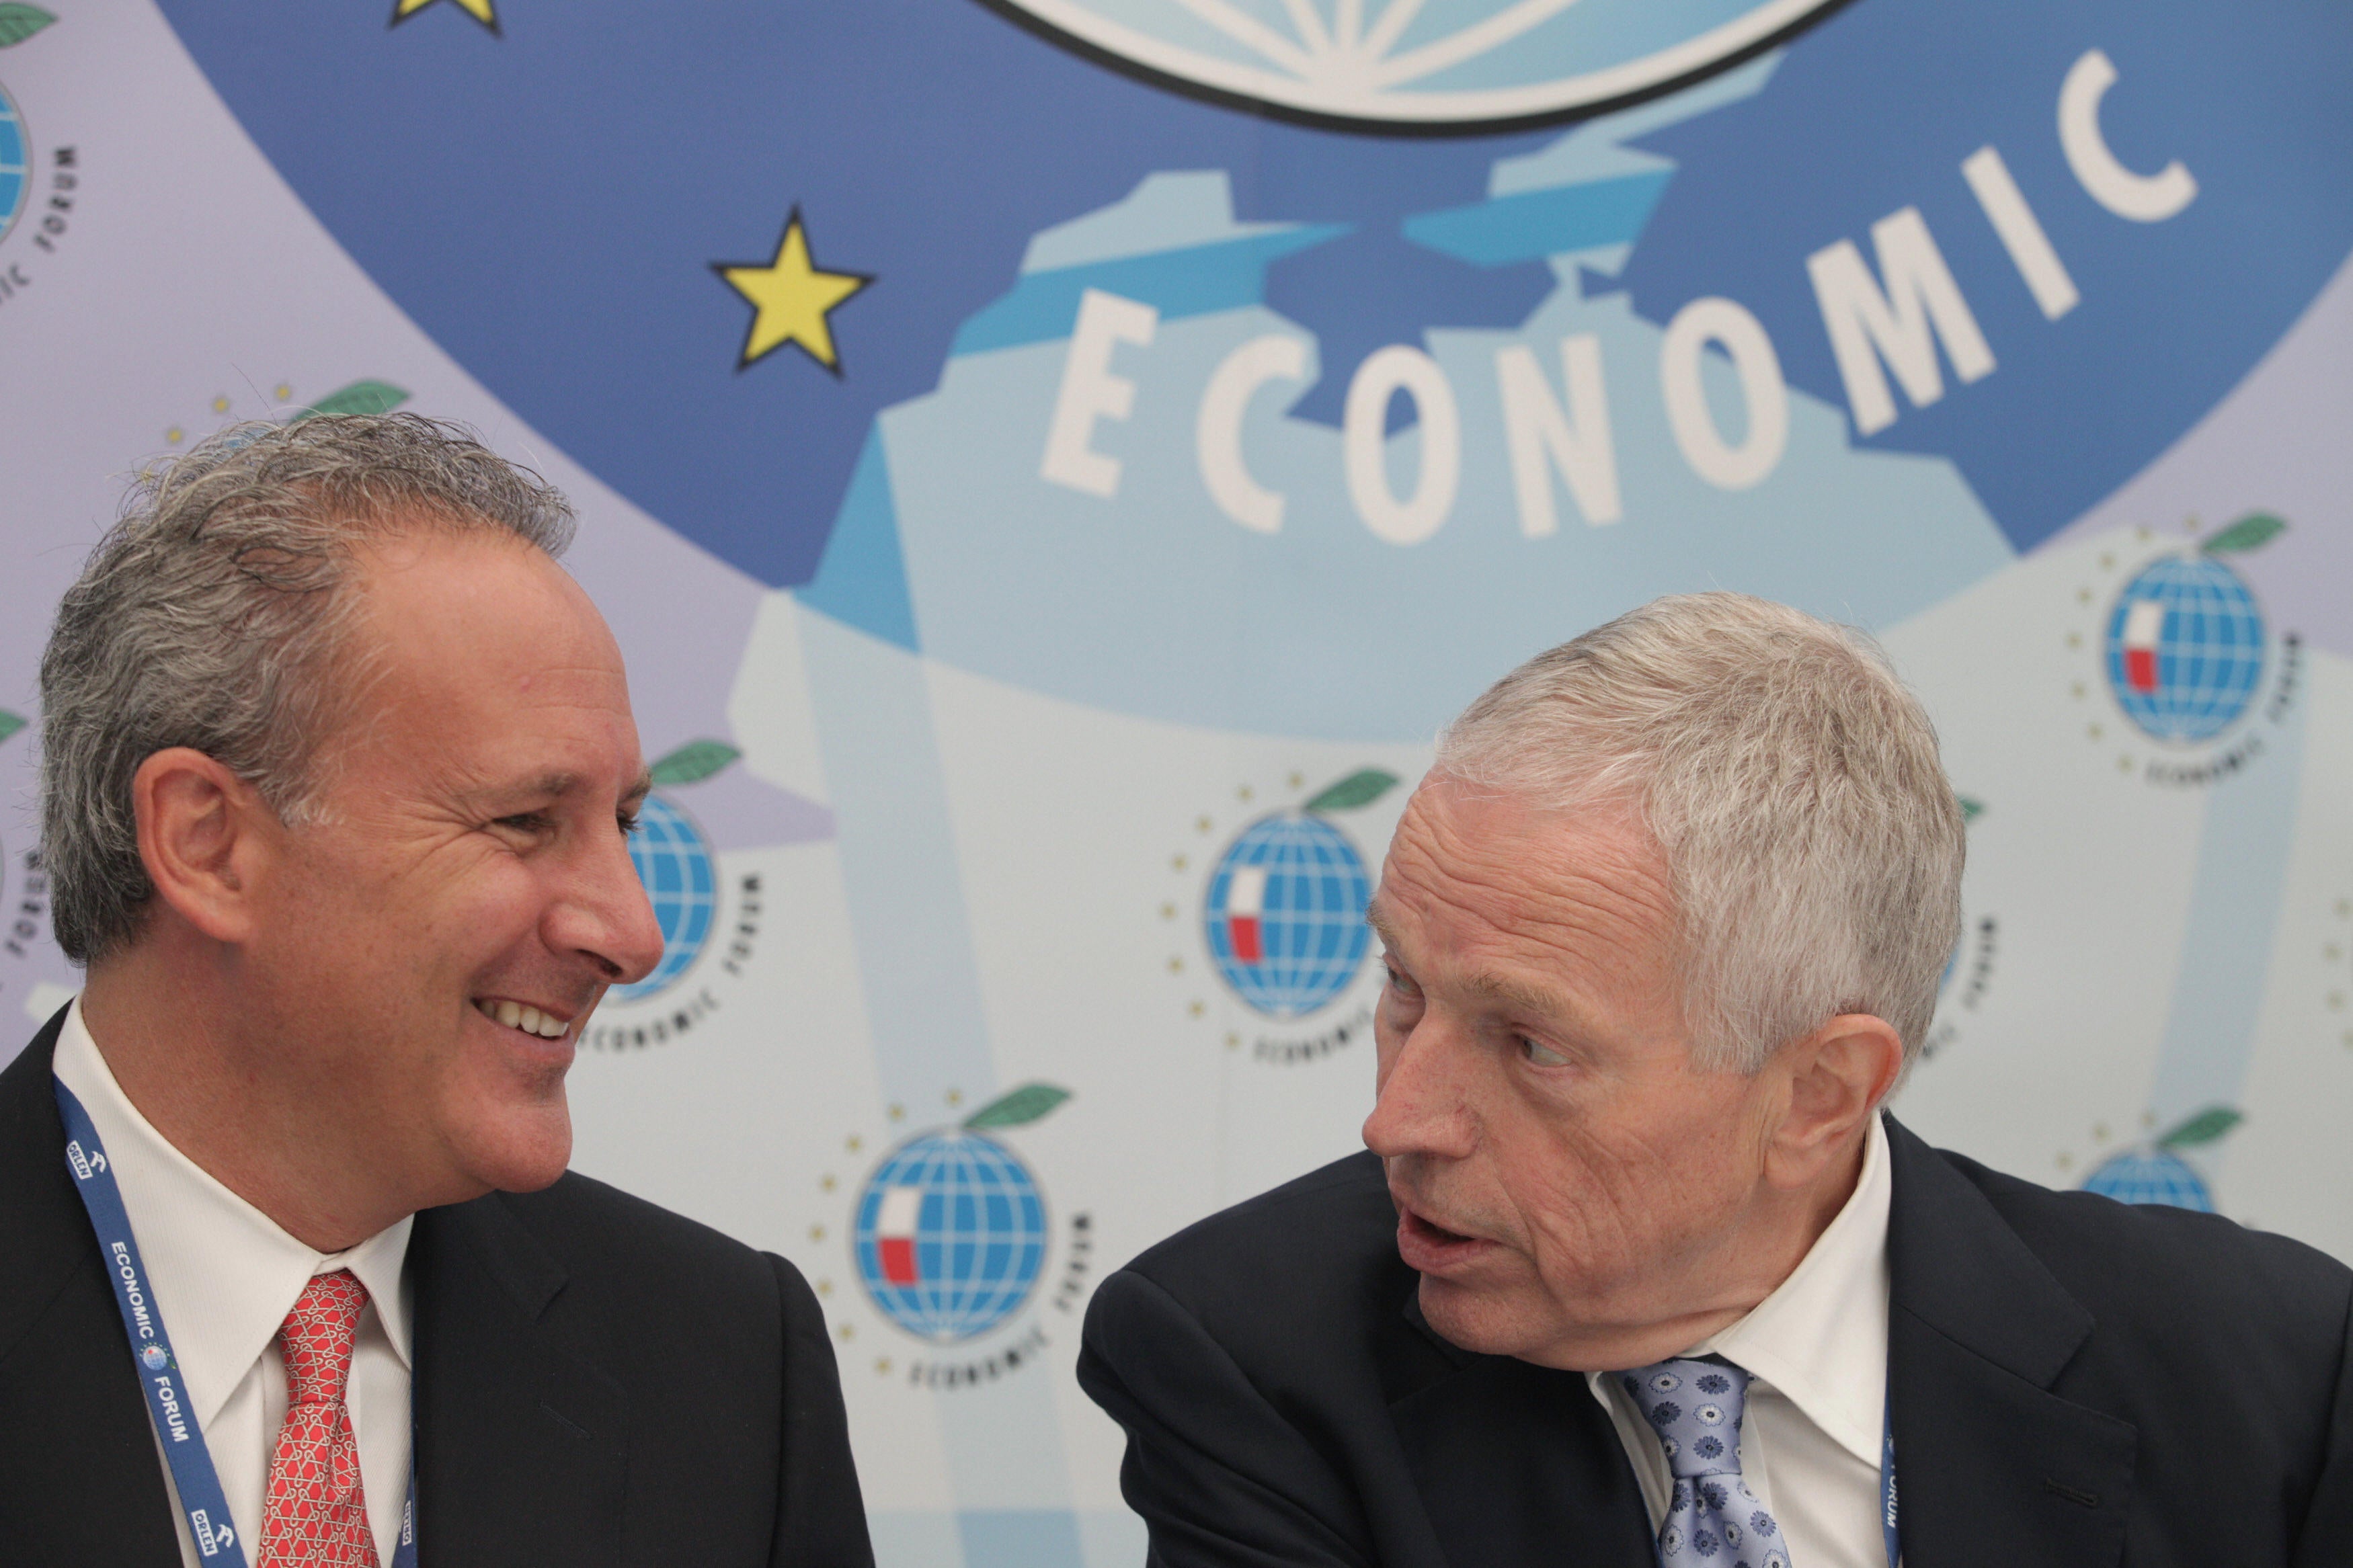 Peter Schiff (left) speaking with economist Edmund Phelps (right). (Photo: BARTEK WRZESNIOWSK/AFP, Getty Images)